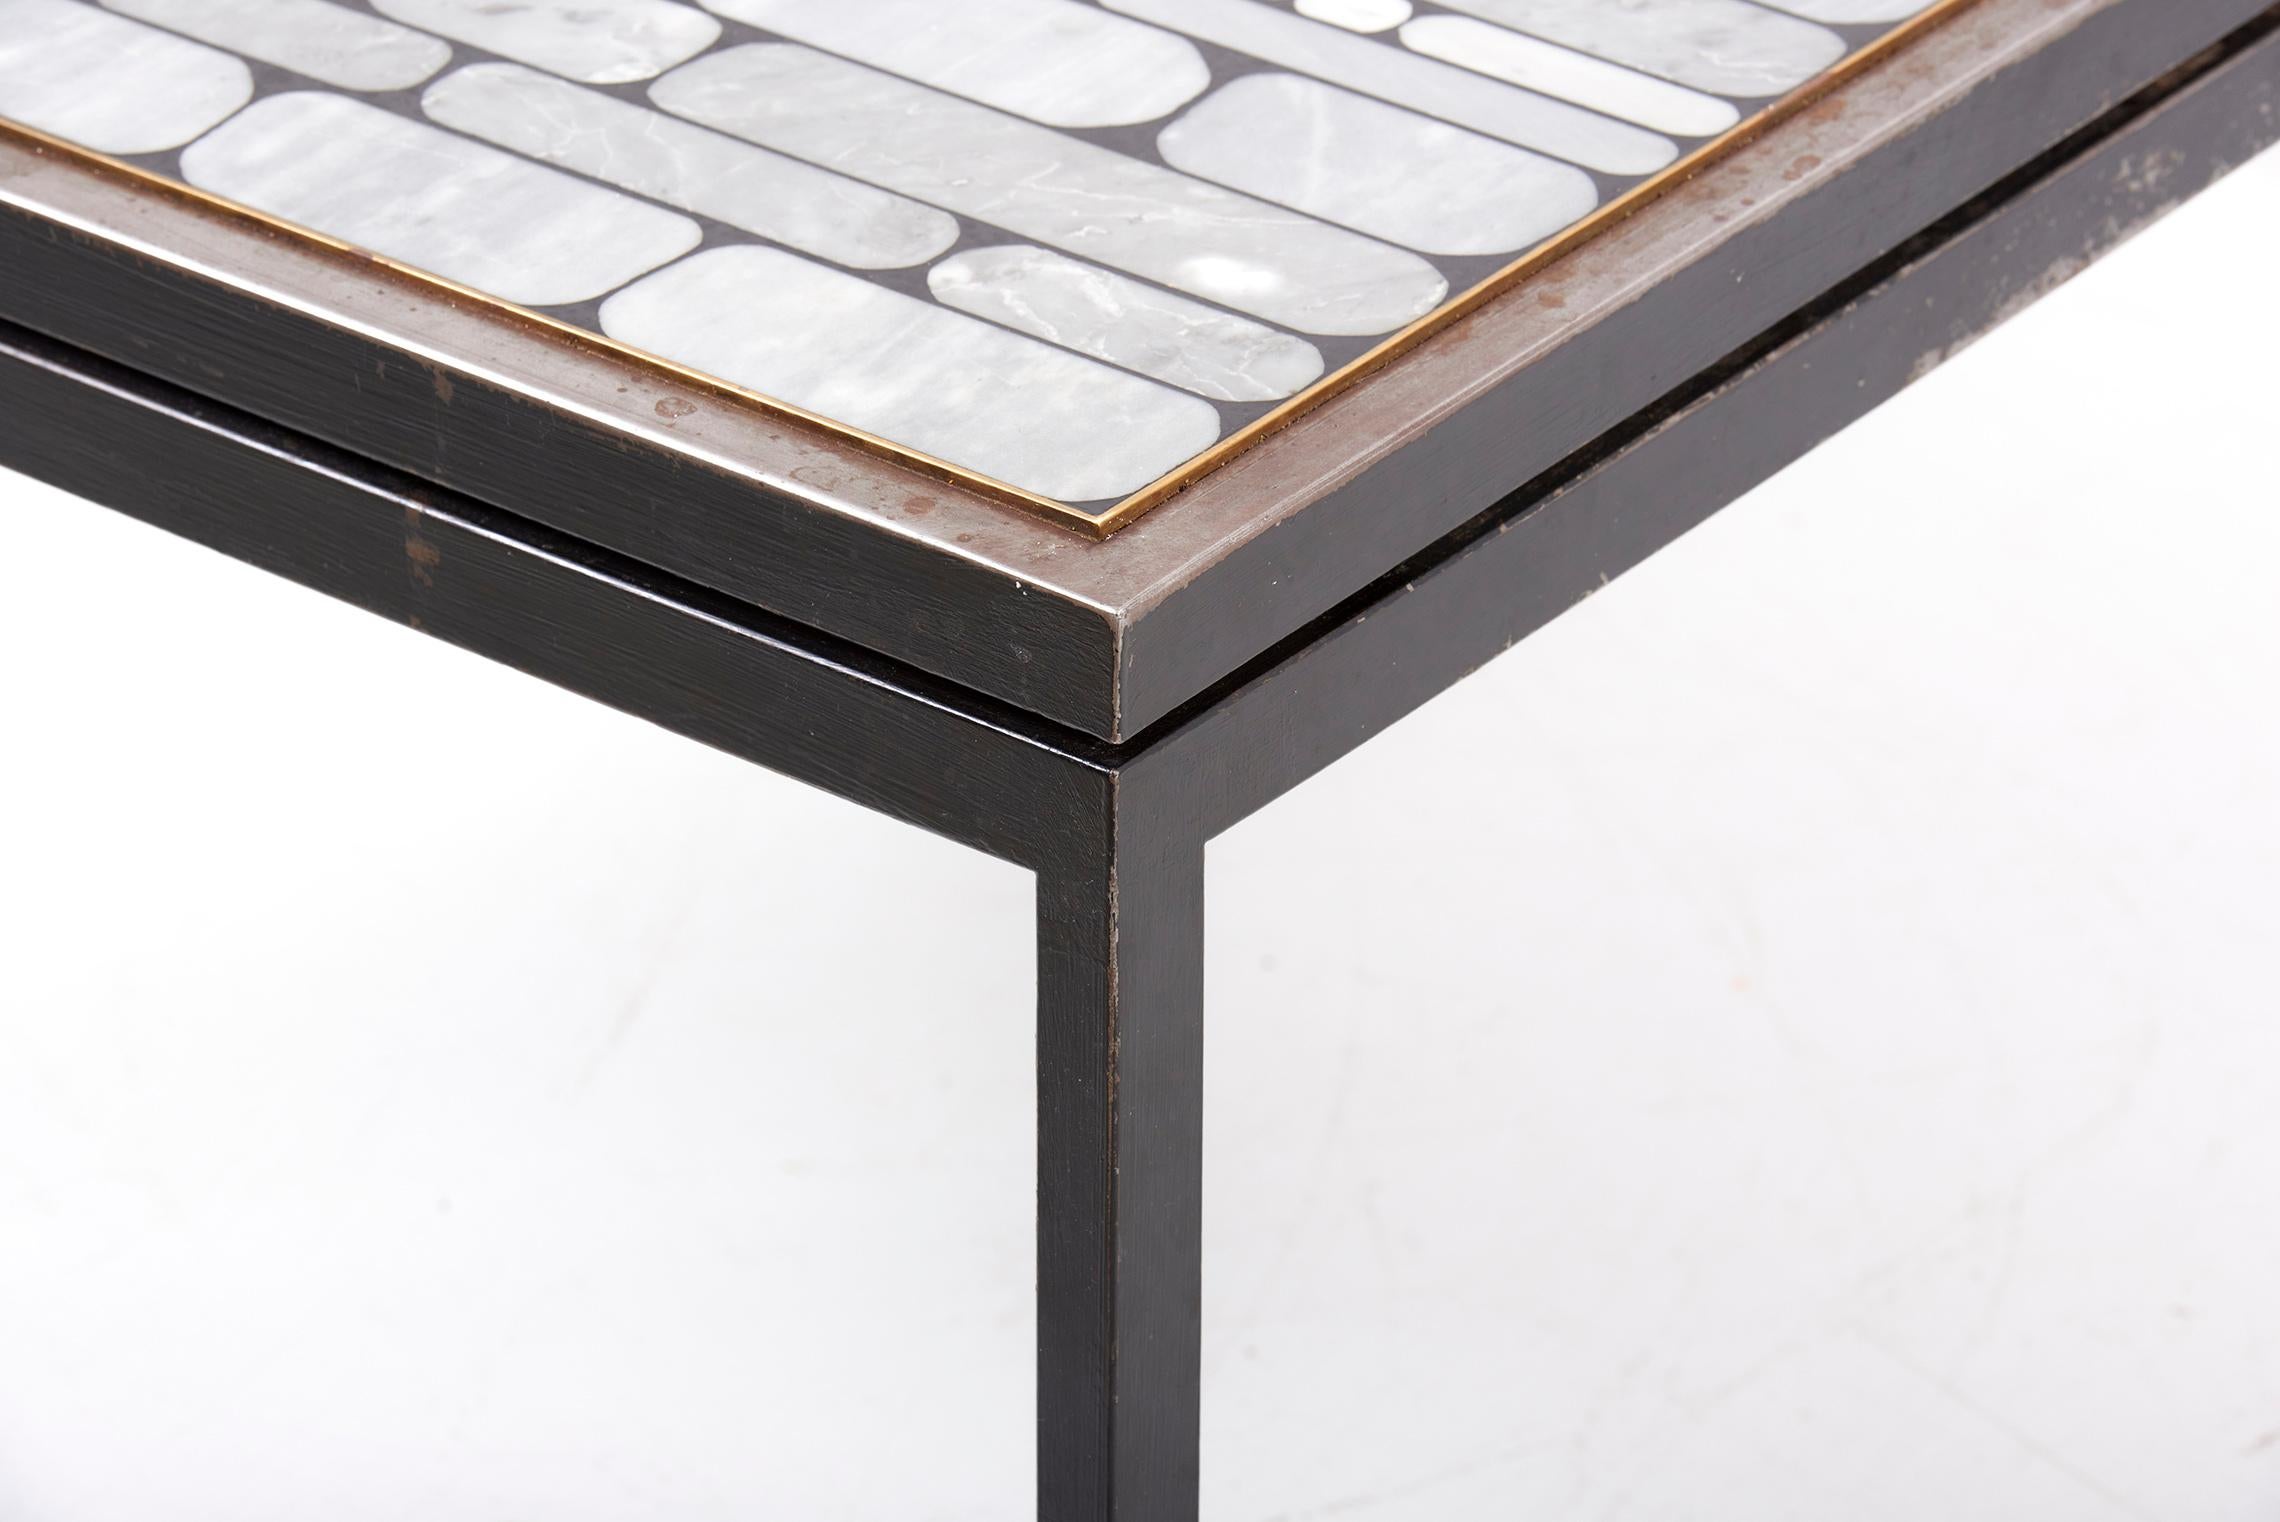 One of Kind Architectural Mosaic Coffee Table with Marble Inlays, Germany 1970s For Sale 6